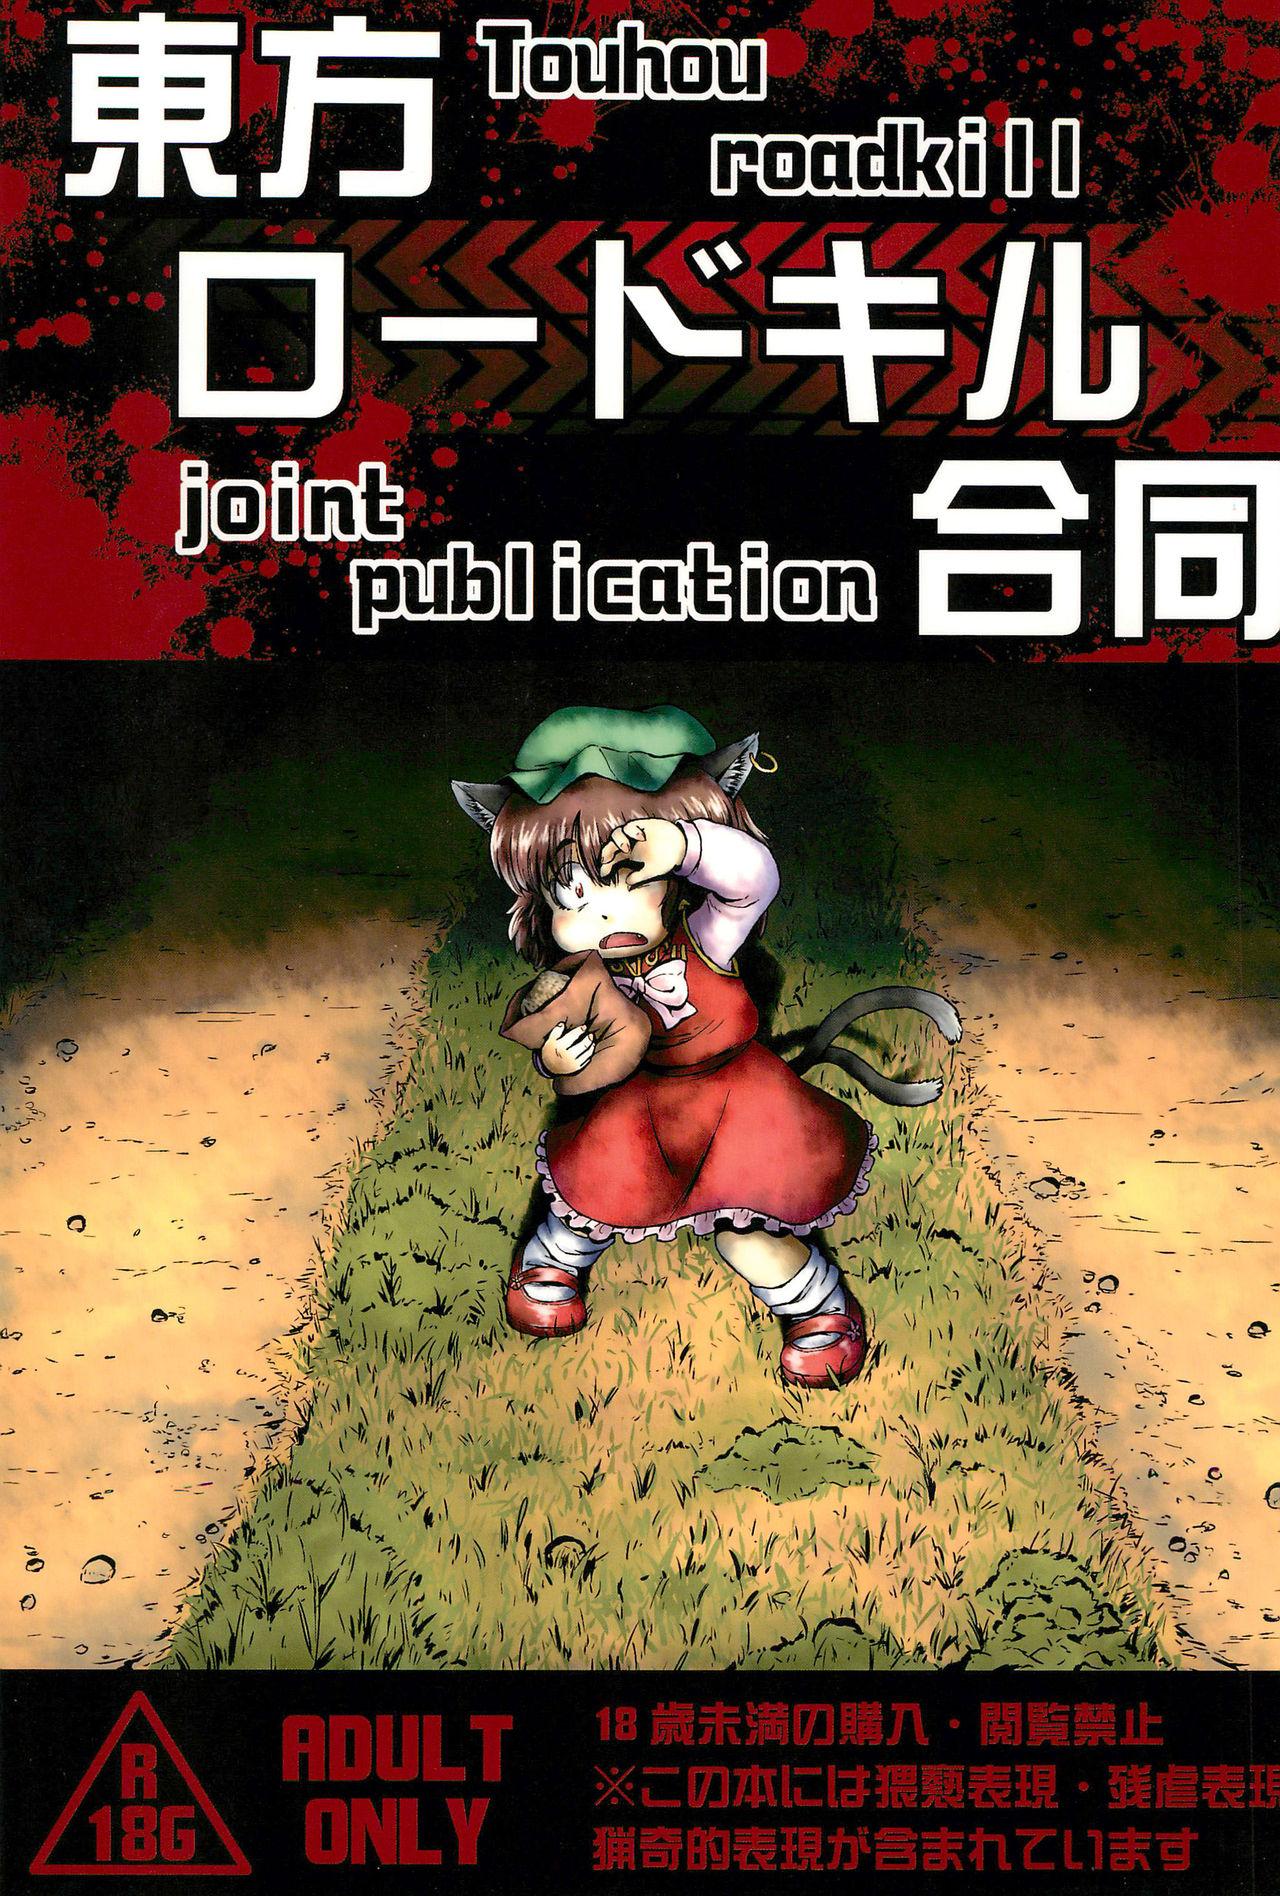 Pareja Touhou Roadkill Joint Publication - Touhou project Throat - Picture 1